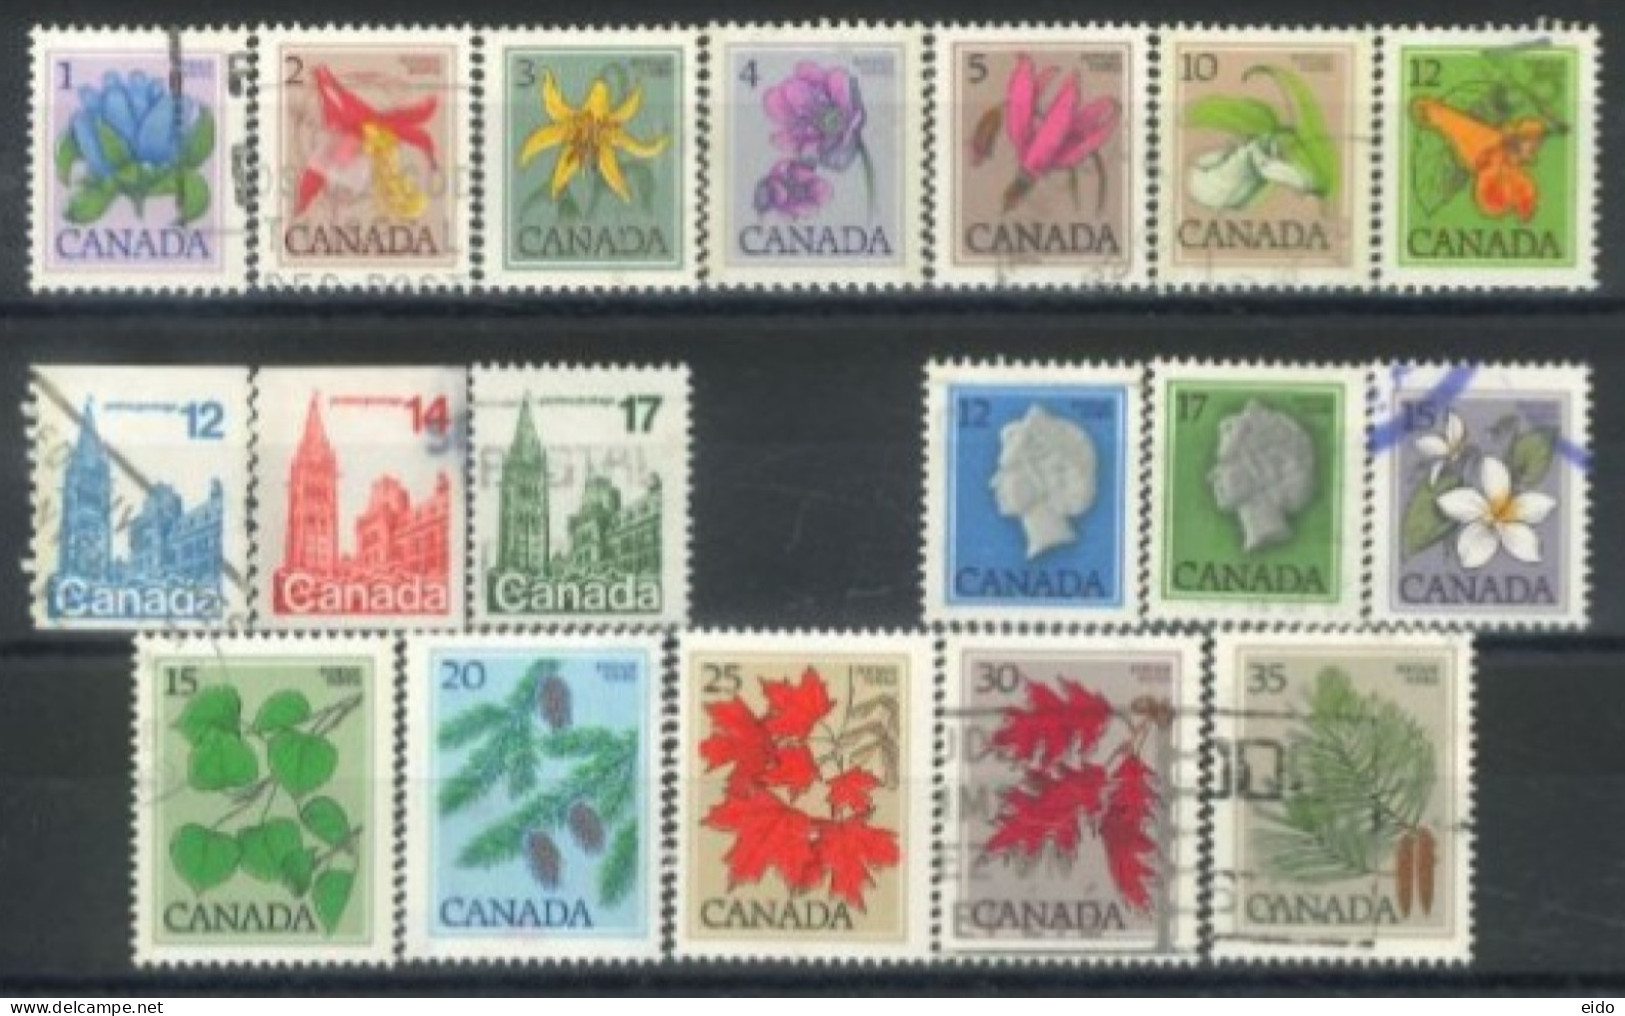 CANADA - 1977, QUEEN ELIZABETH II, HOUSE OF PARLIAMENT, FLOWERS & LEAVES STAMPS SET OF 18, USED. - Usati